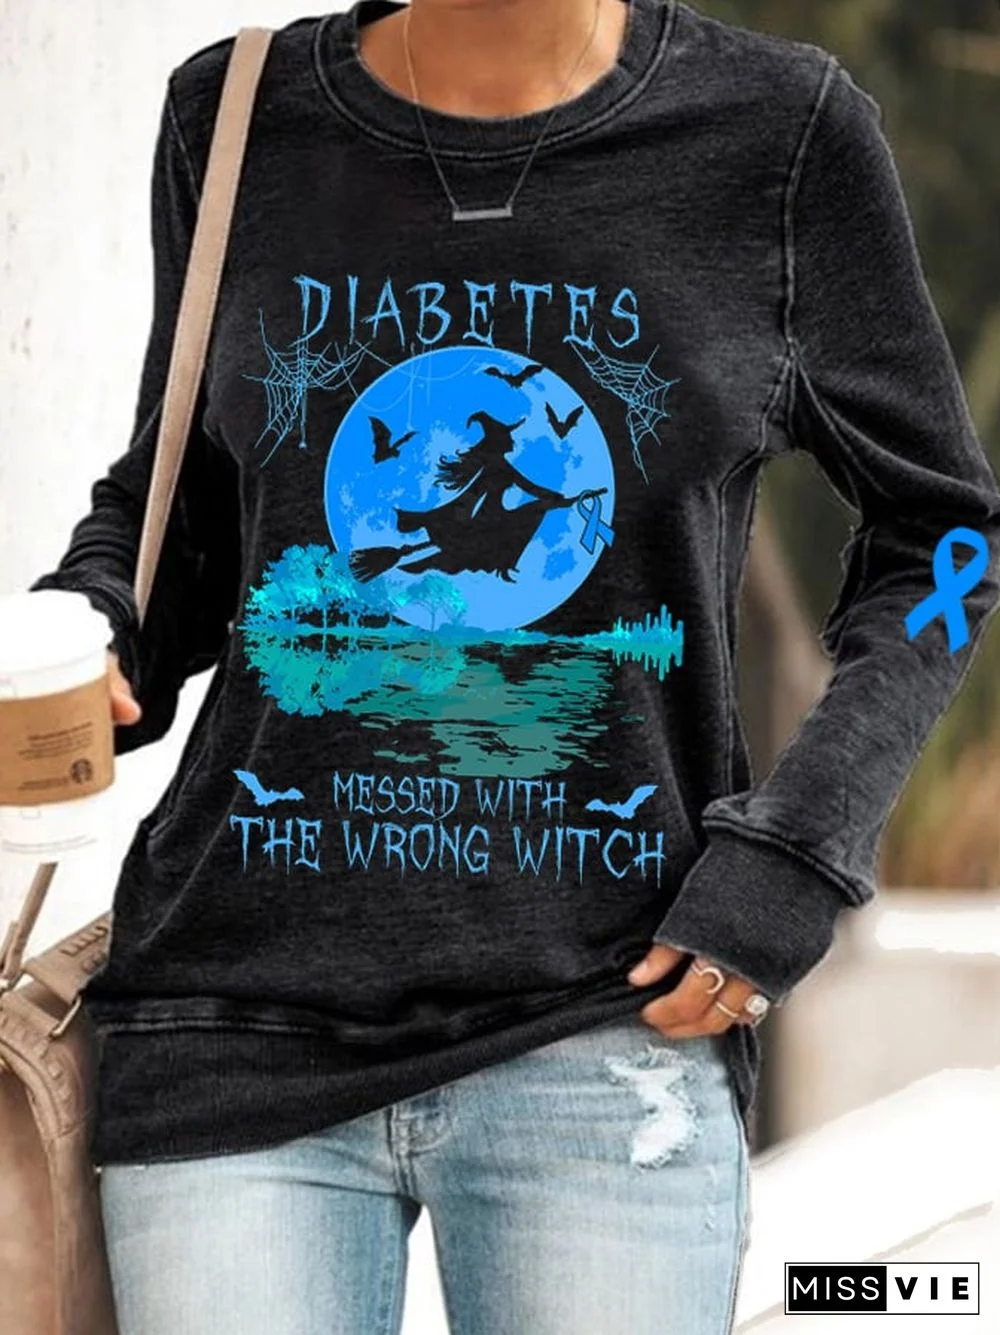 Women's Diabetes Awareness Diabetes Messed With The Wrong Witch Printed Sweatshirt